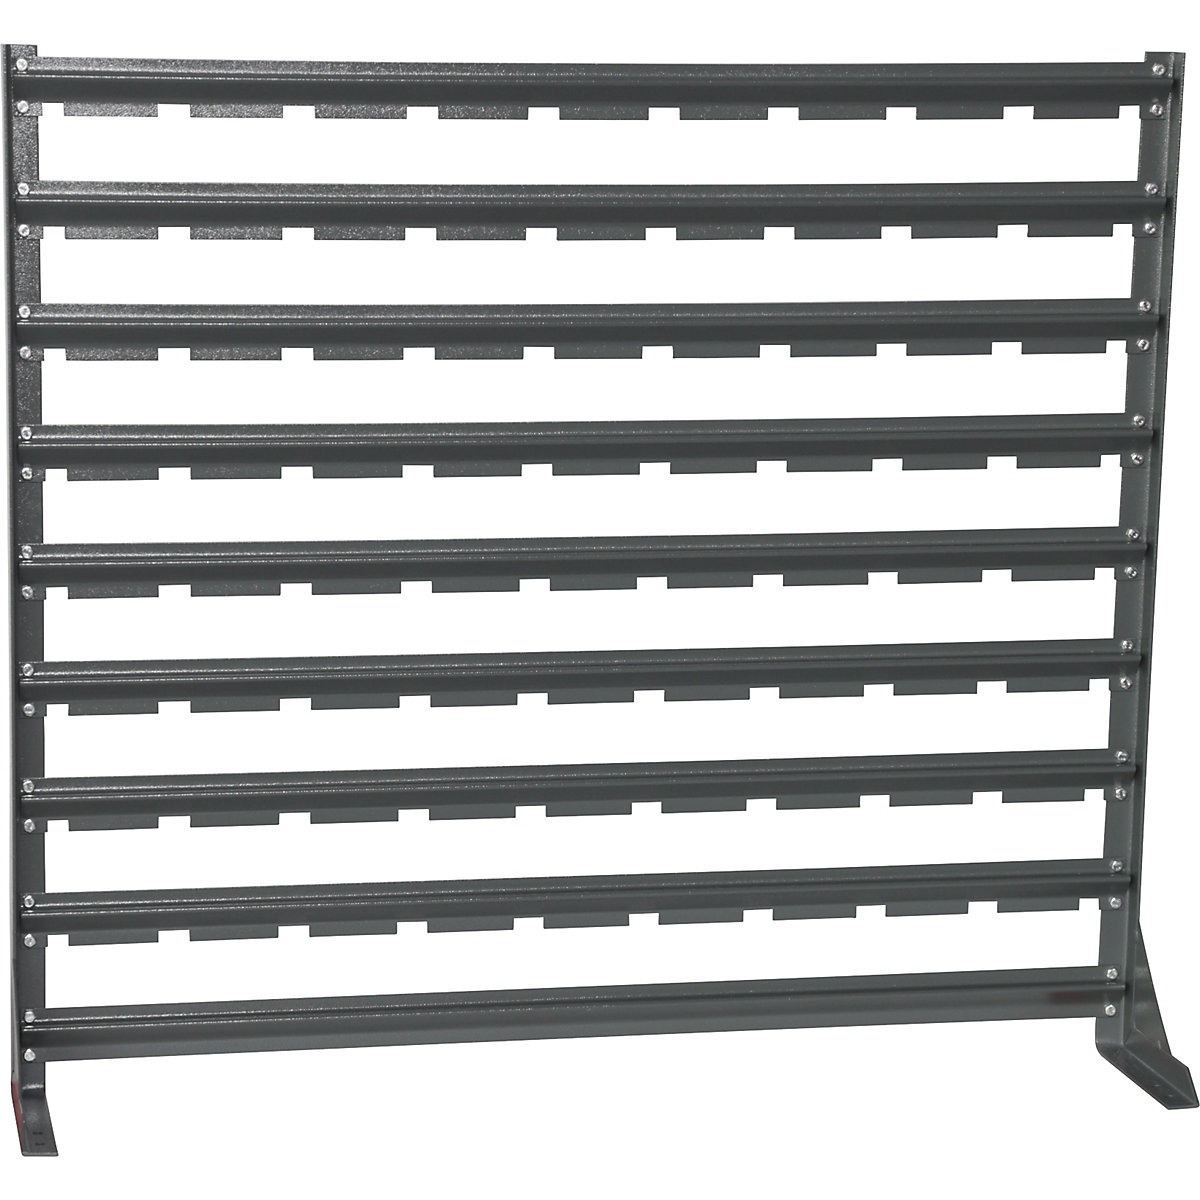 Small parts shelf unit, width 1020 mm, without open fronted storage bins, HxD 900 x 200 mm-5